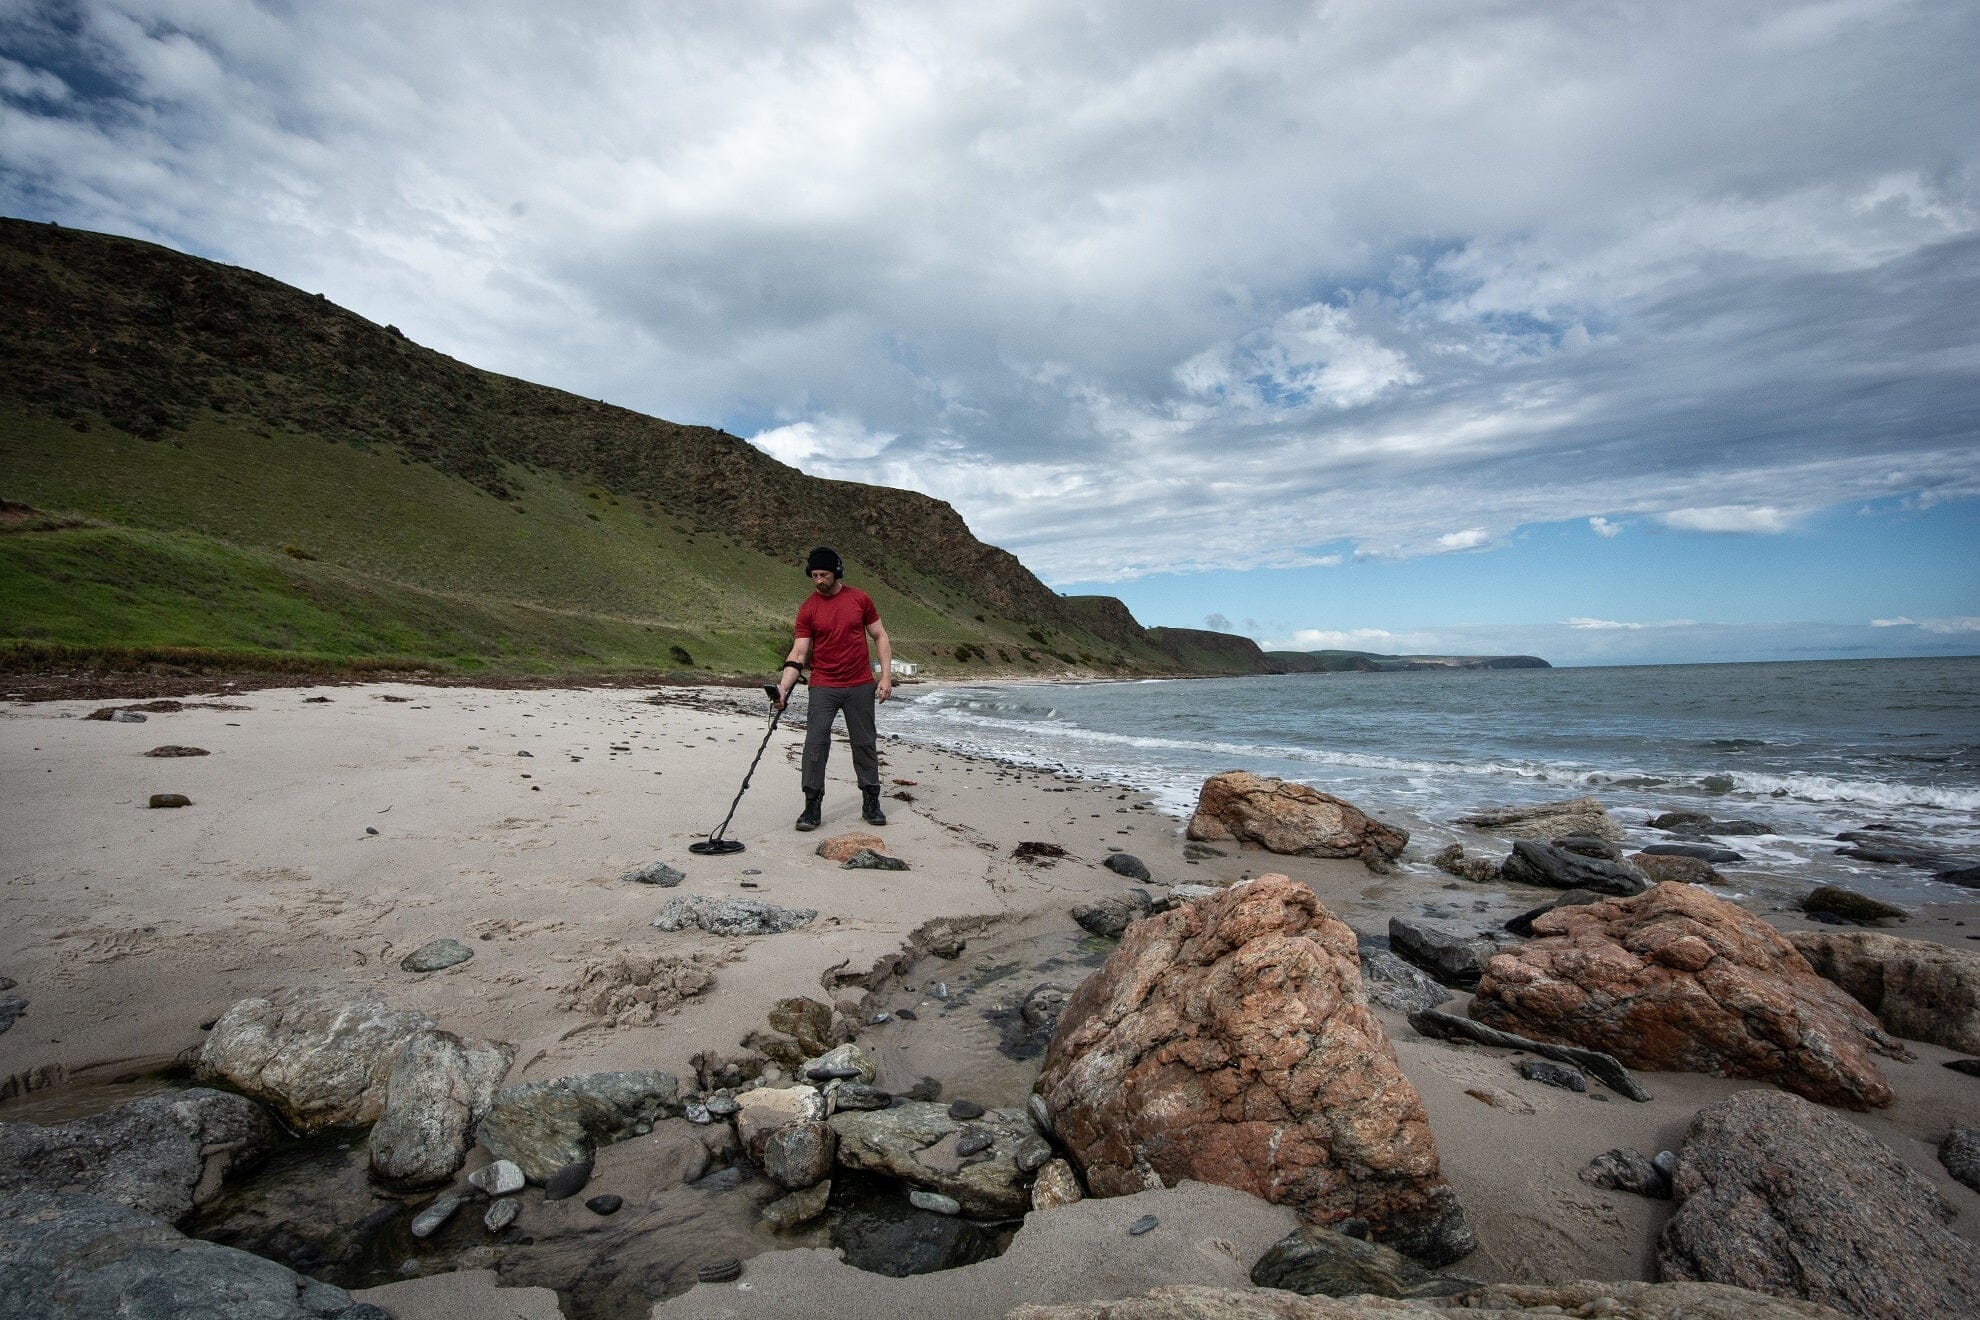 Equinox 900 metal detector in use on the beach